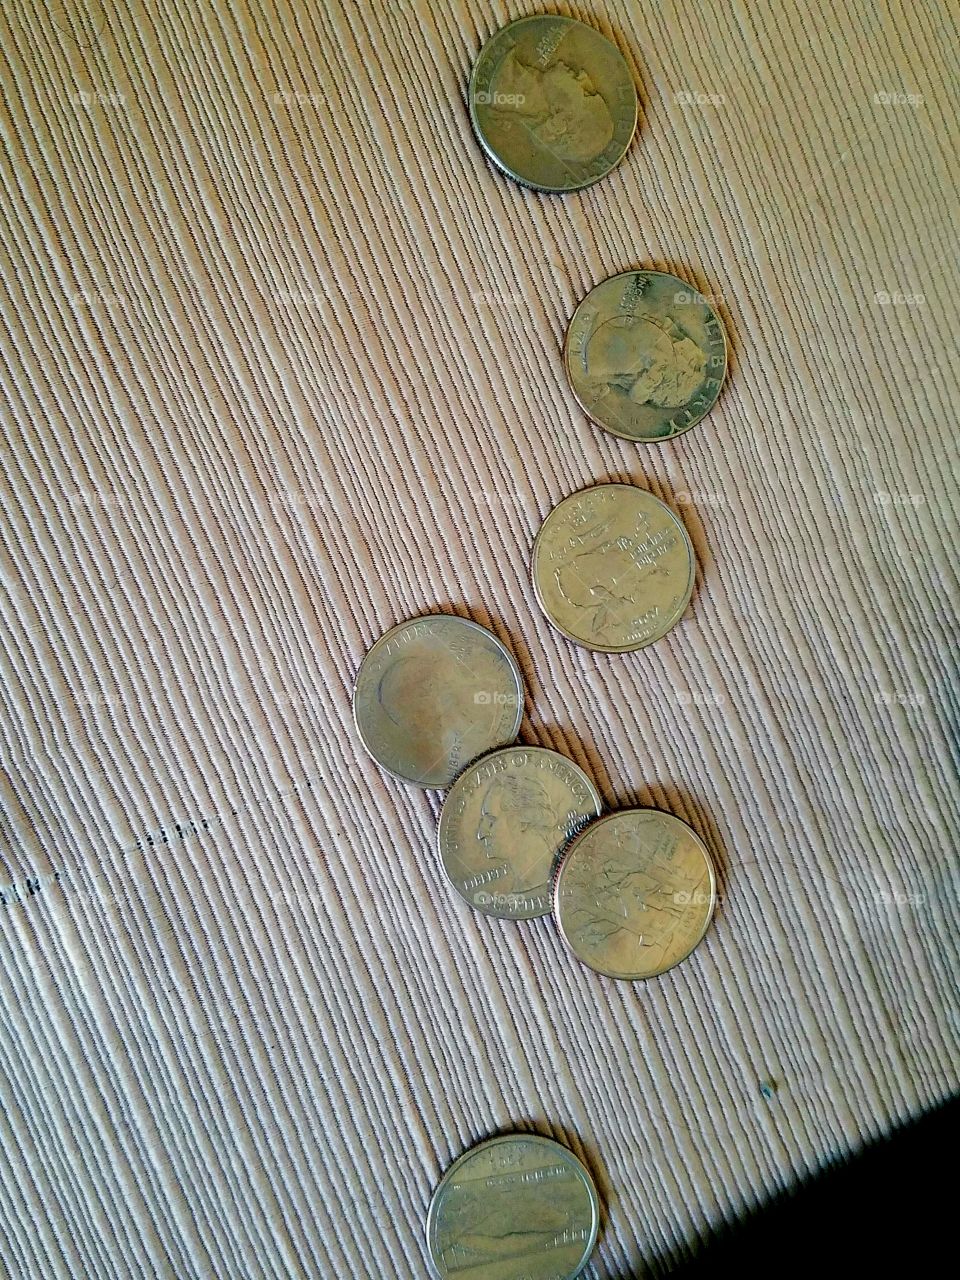 loose change, coins